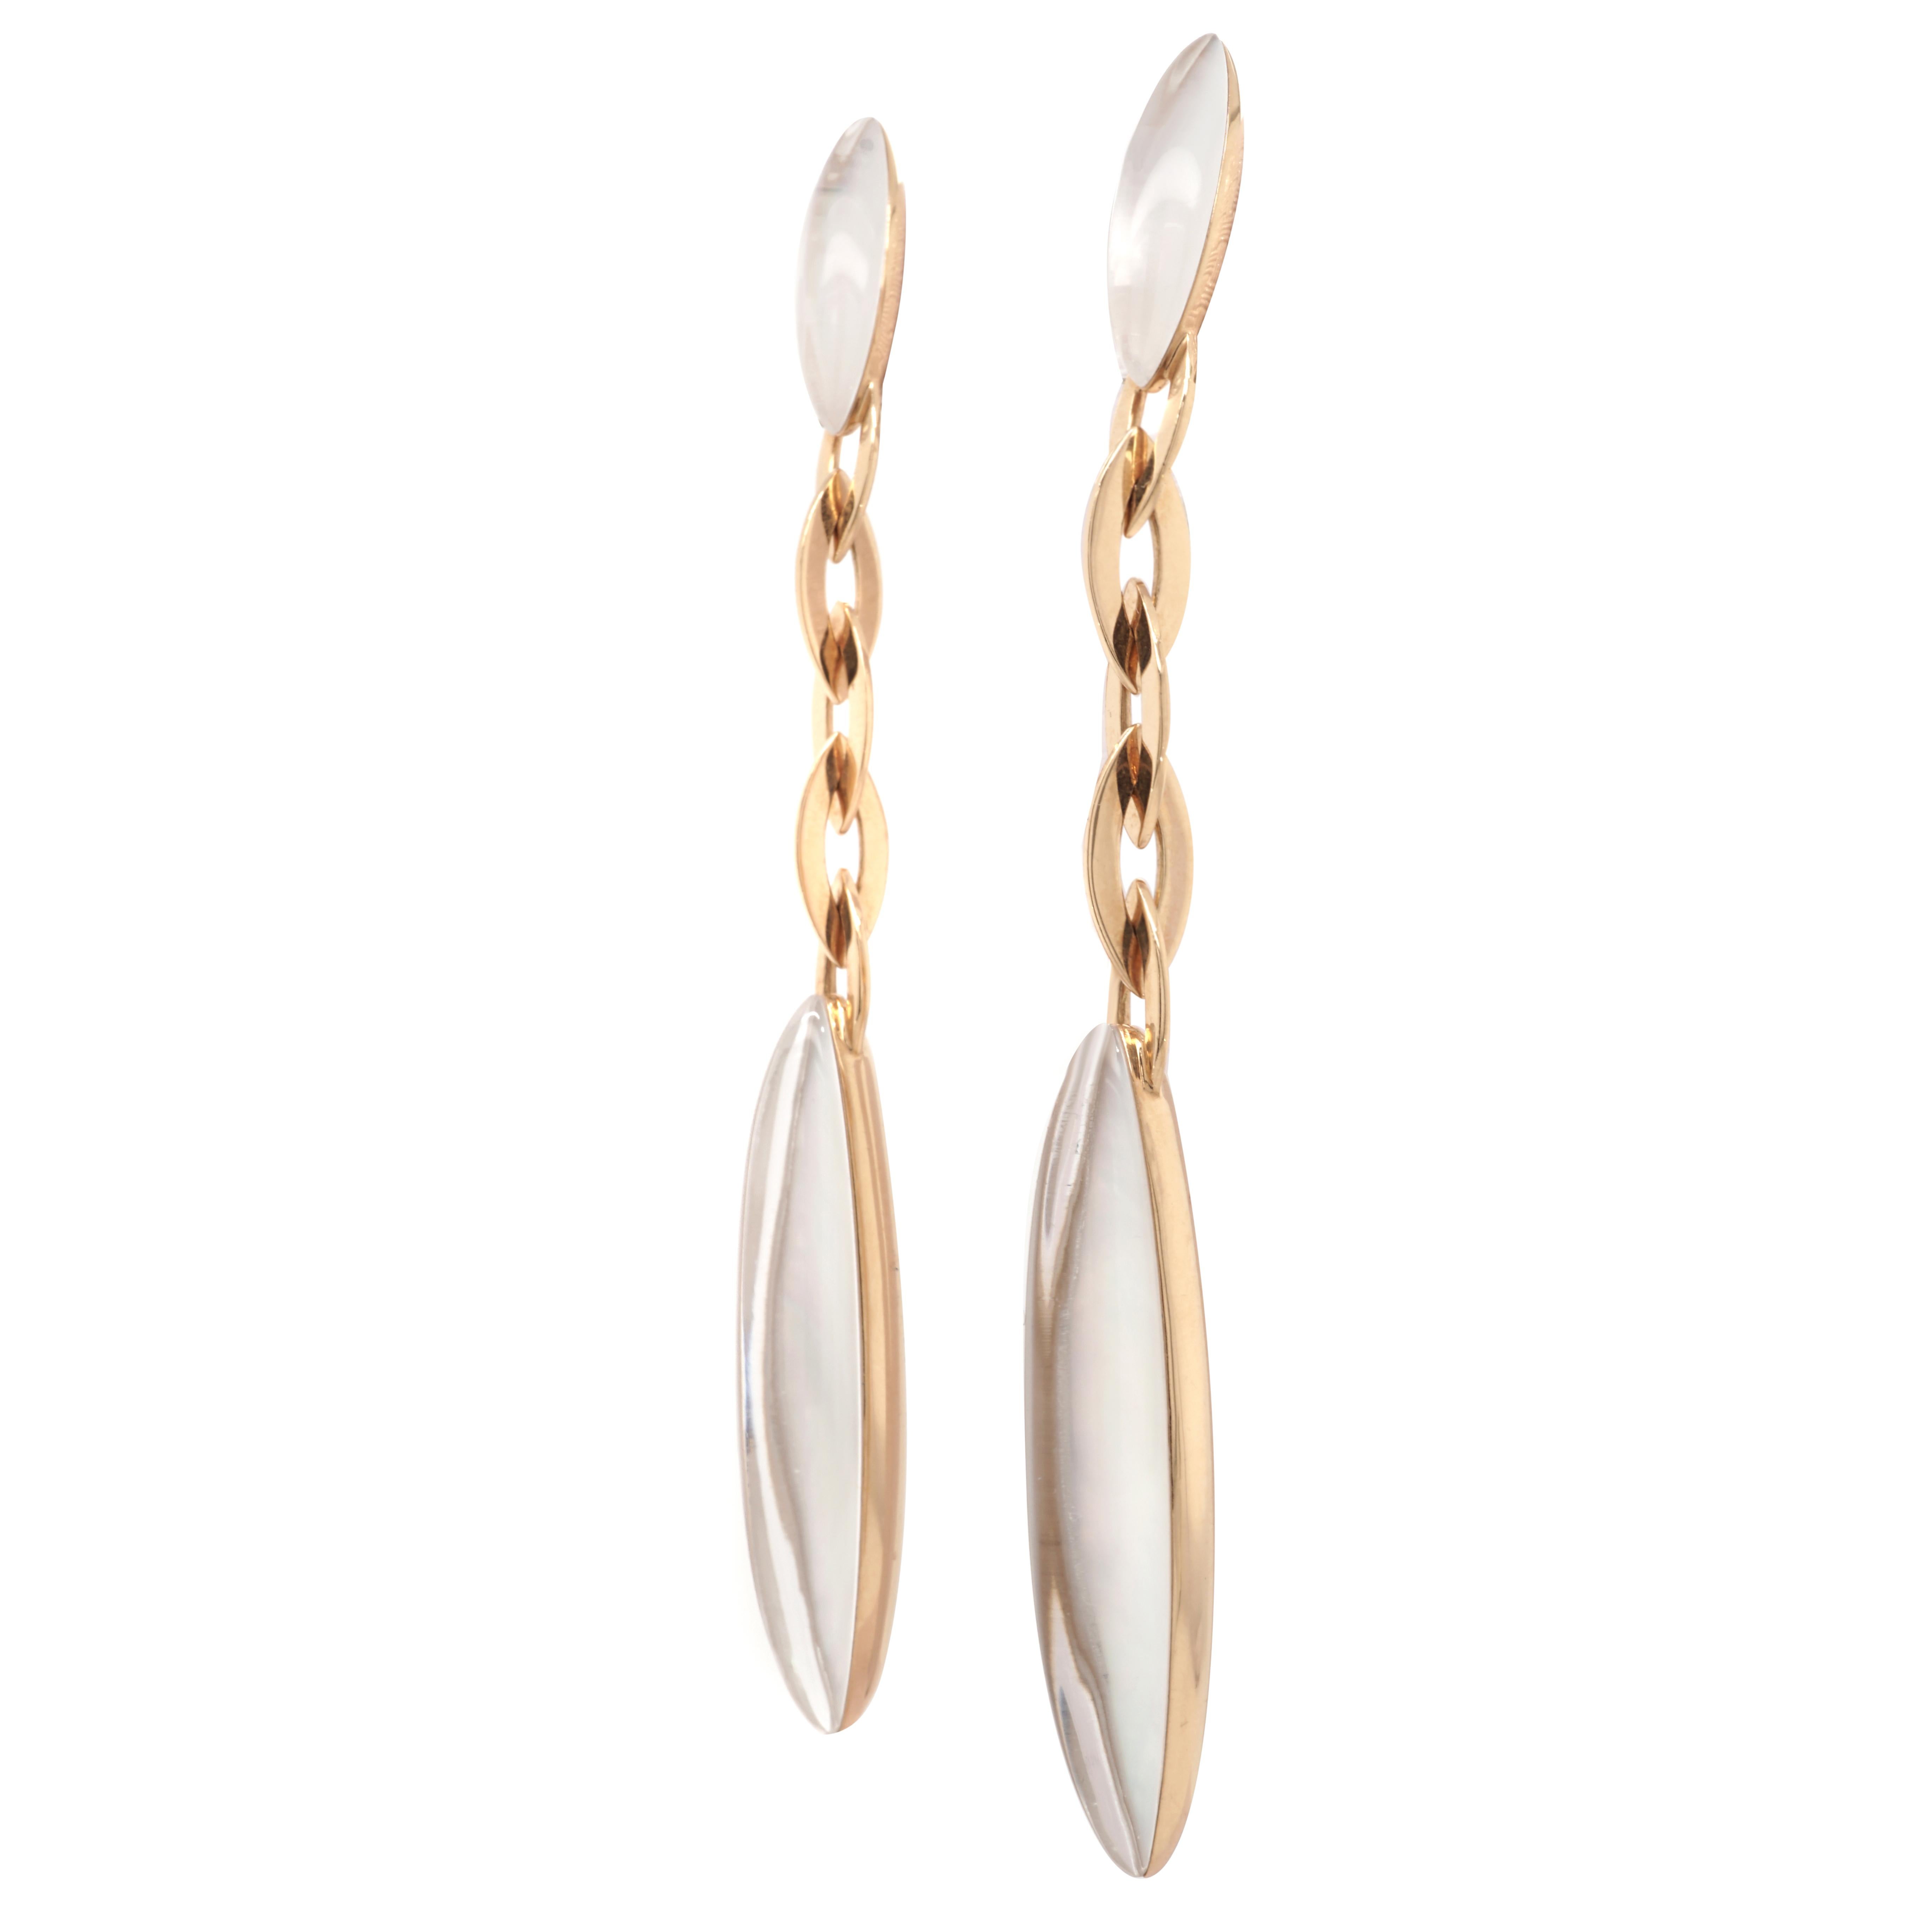 Crafted by Vhenier, these beautiful long drop earrings feature 4 marquise shape cabochon cut rock crystal backed with mother of pearl are set in 18 karat yellow gold.
Signed: Vhenier stamped: 750
Dimensions: L 3 1/2